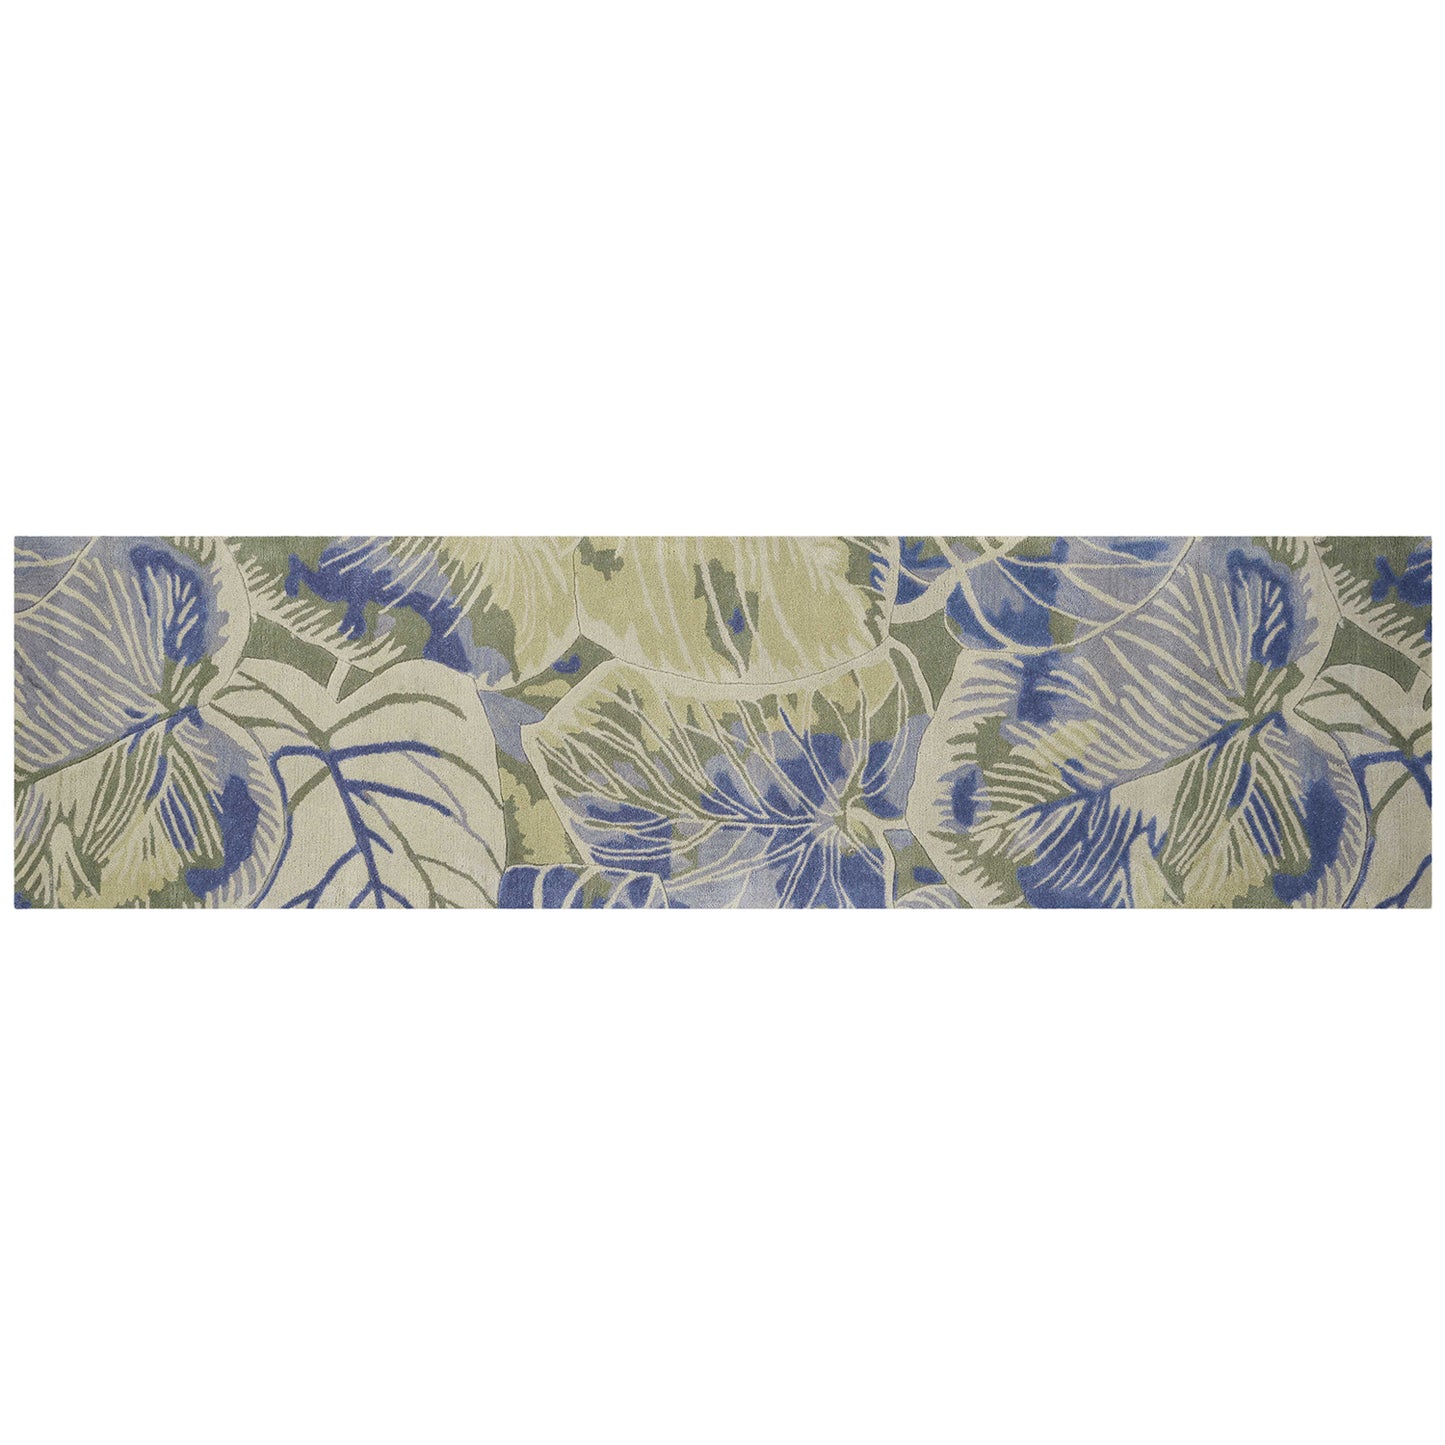 3' X 5' Blue Or Green Tropical Leaves Wool Indoor Area Rug